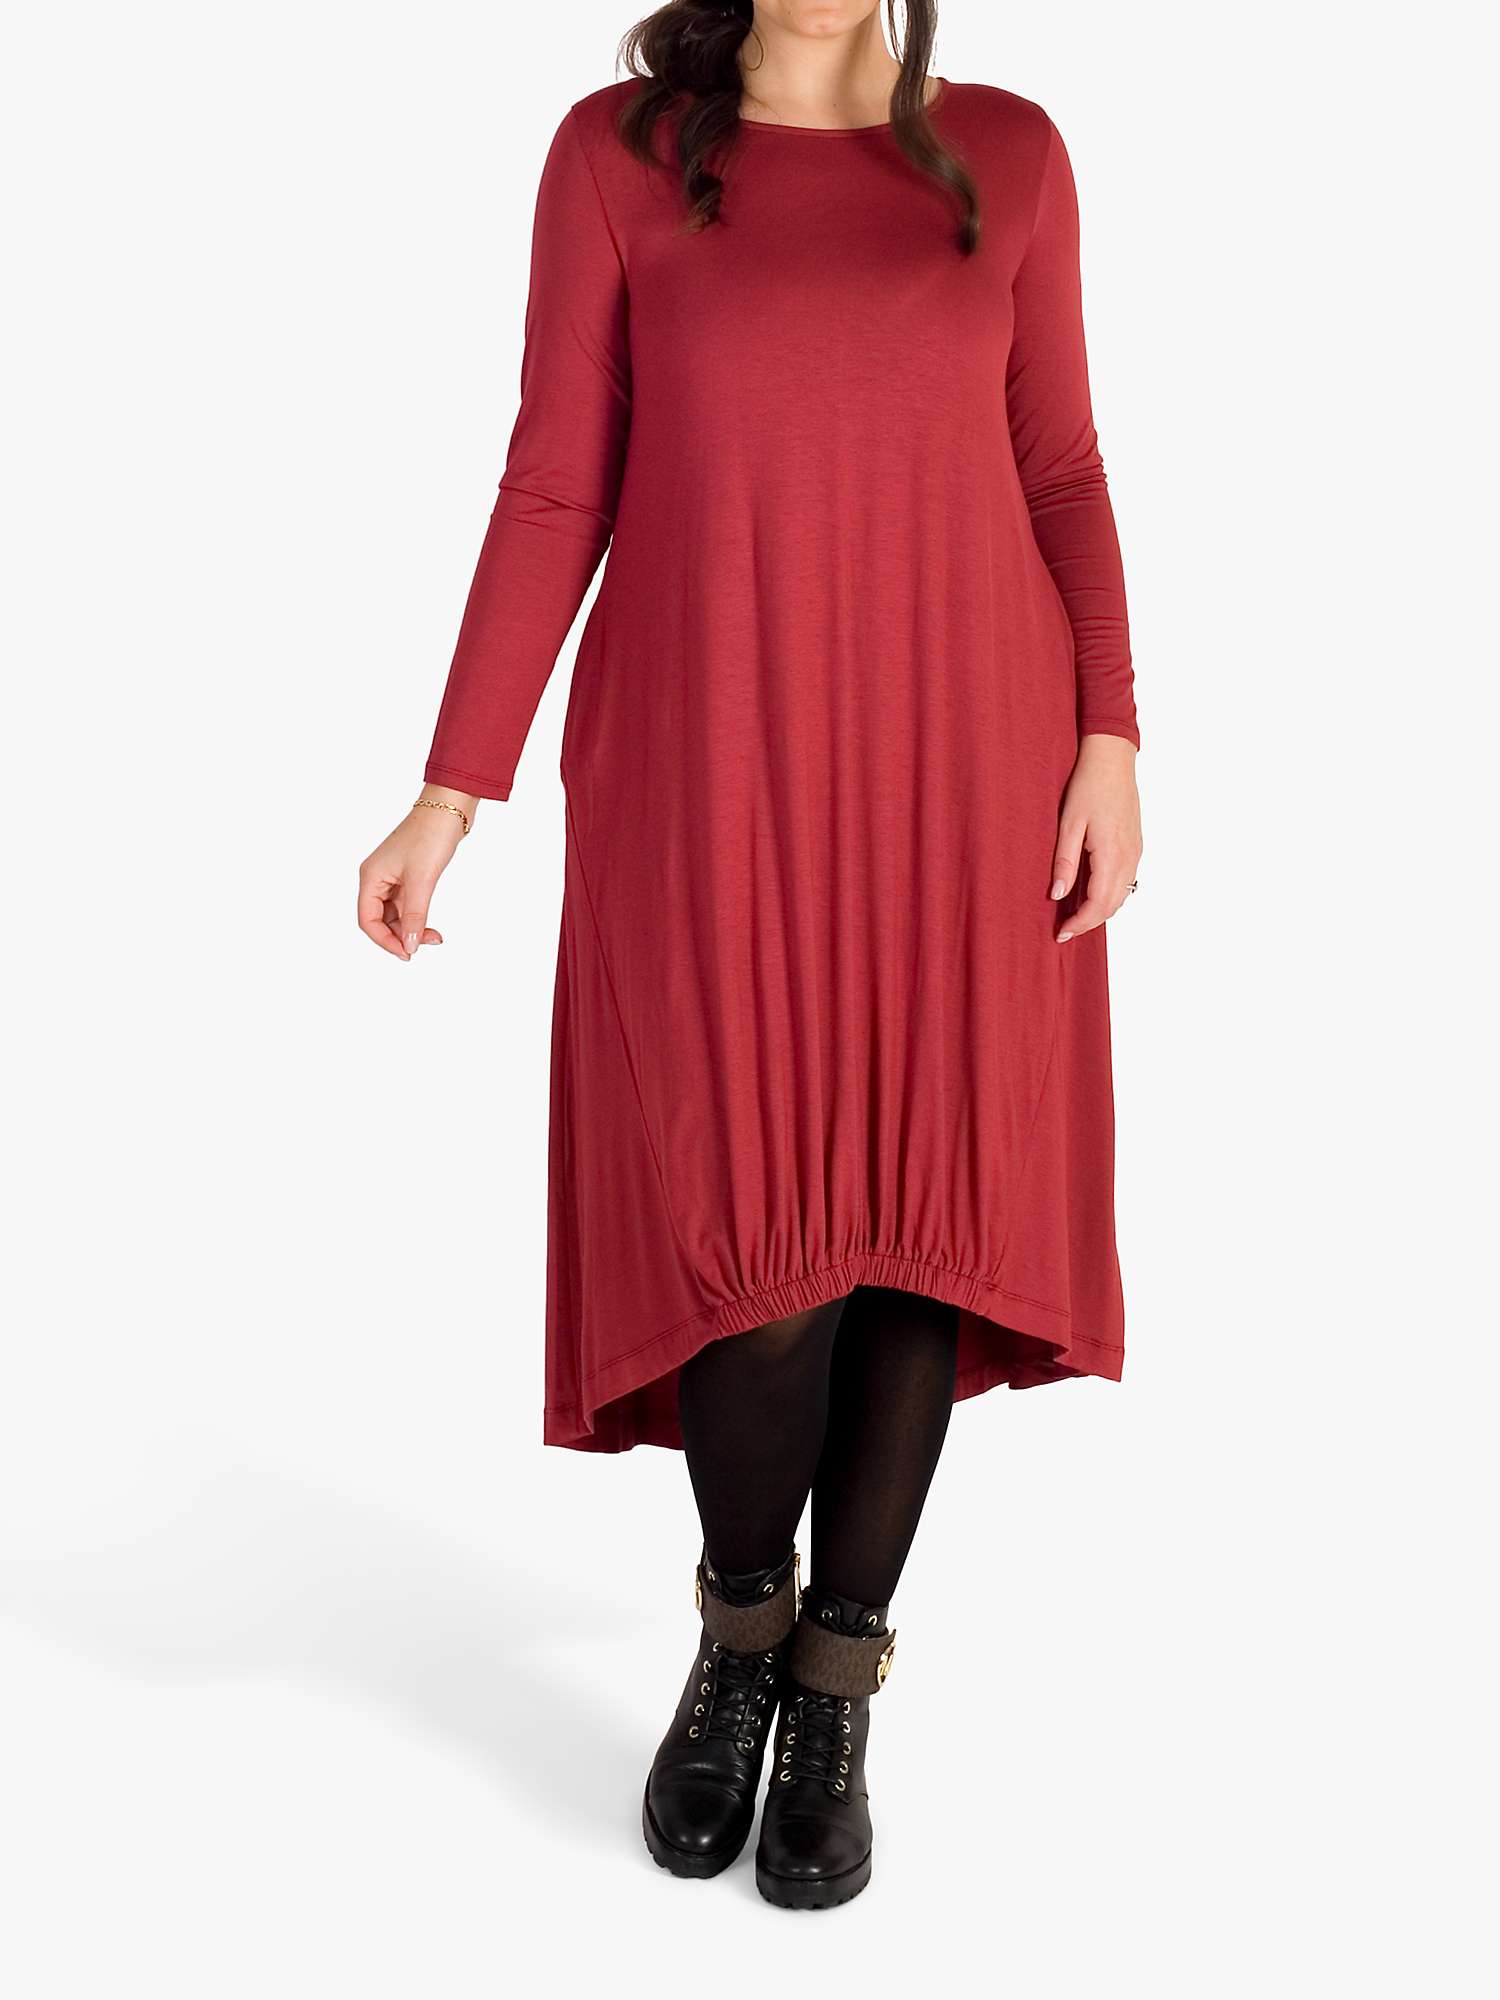 Buy chesca Ruched Hem Midi Dress, Red Online at johnlewis.com